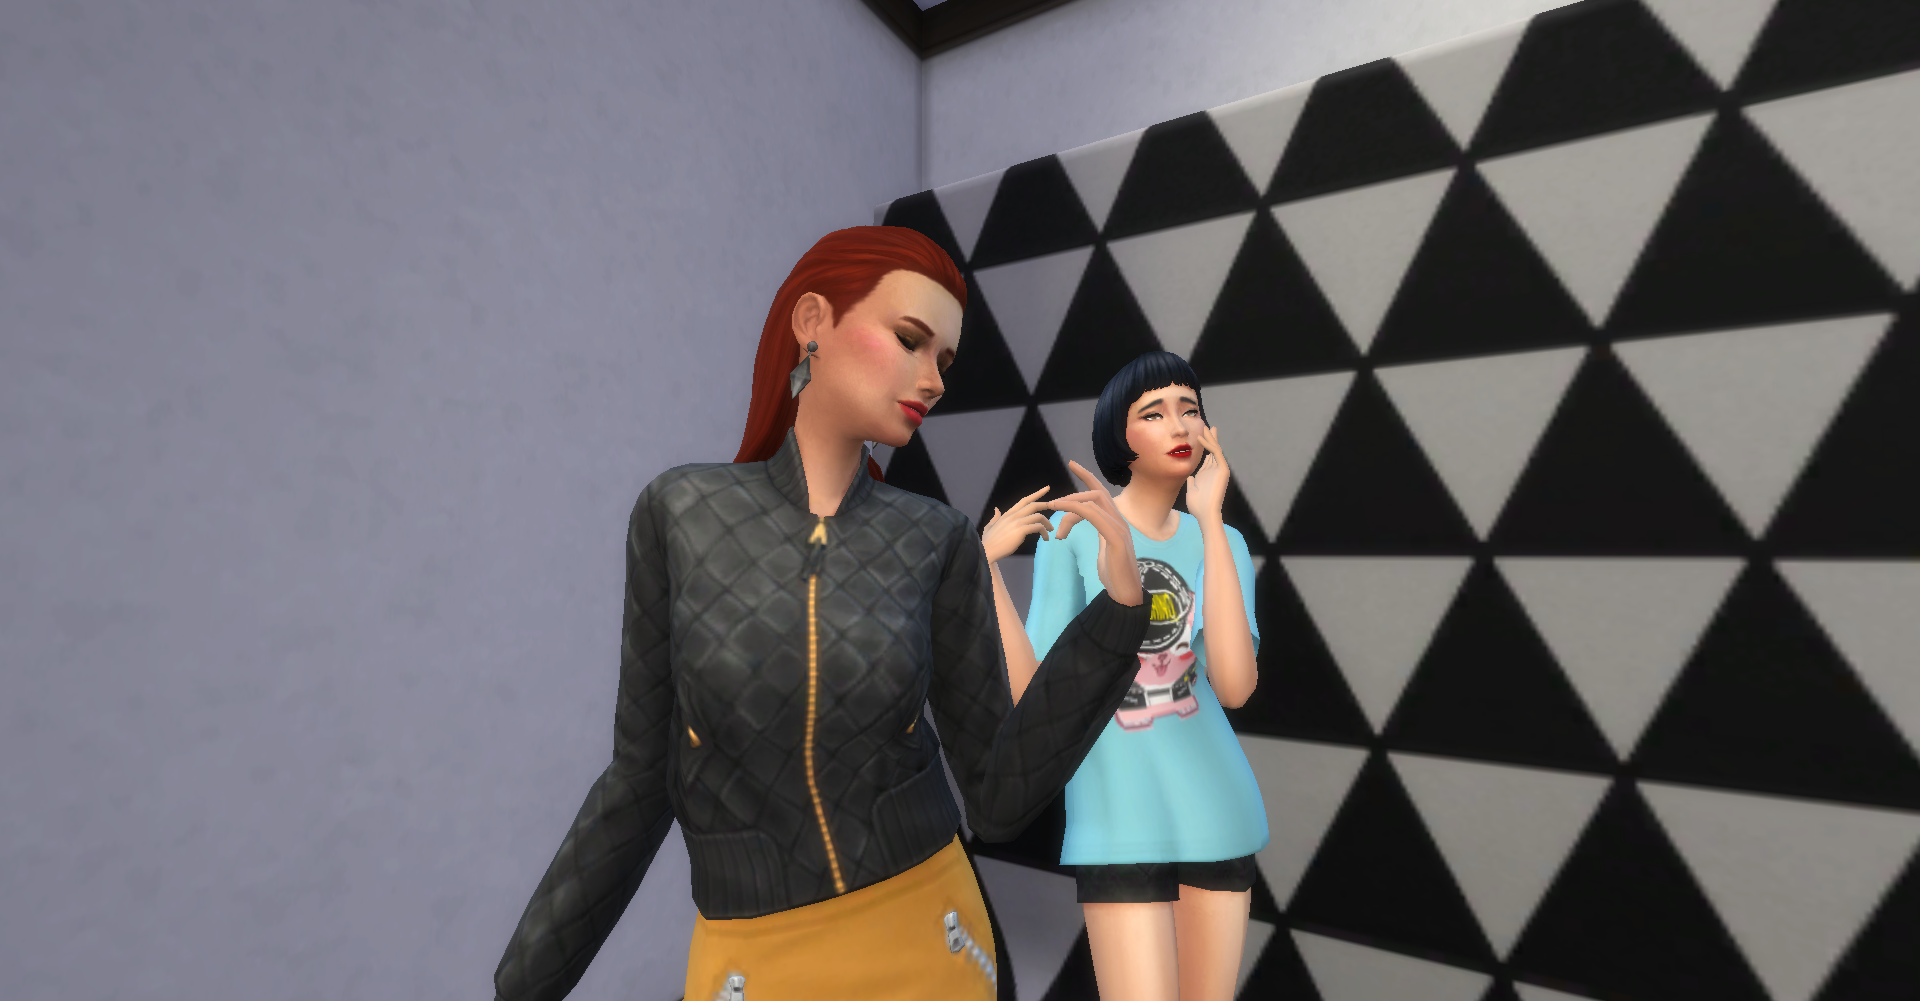 Check out the Sims 4 and Moschino collection, available both in-game and  IRL